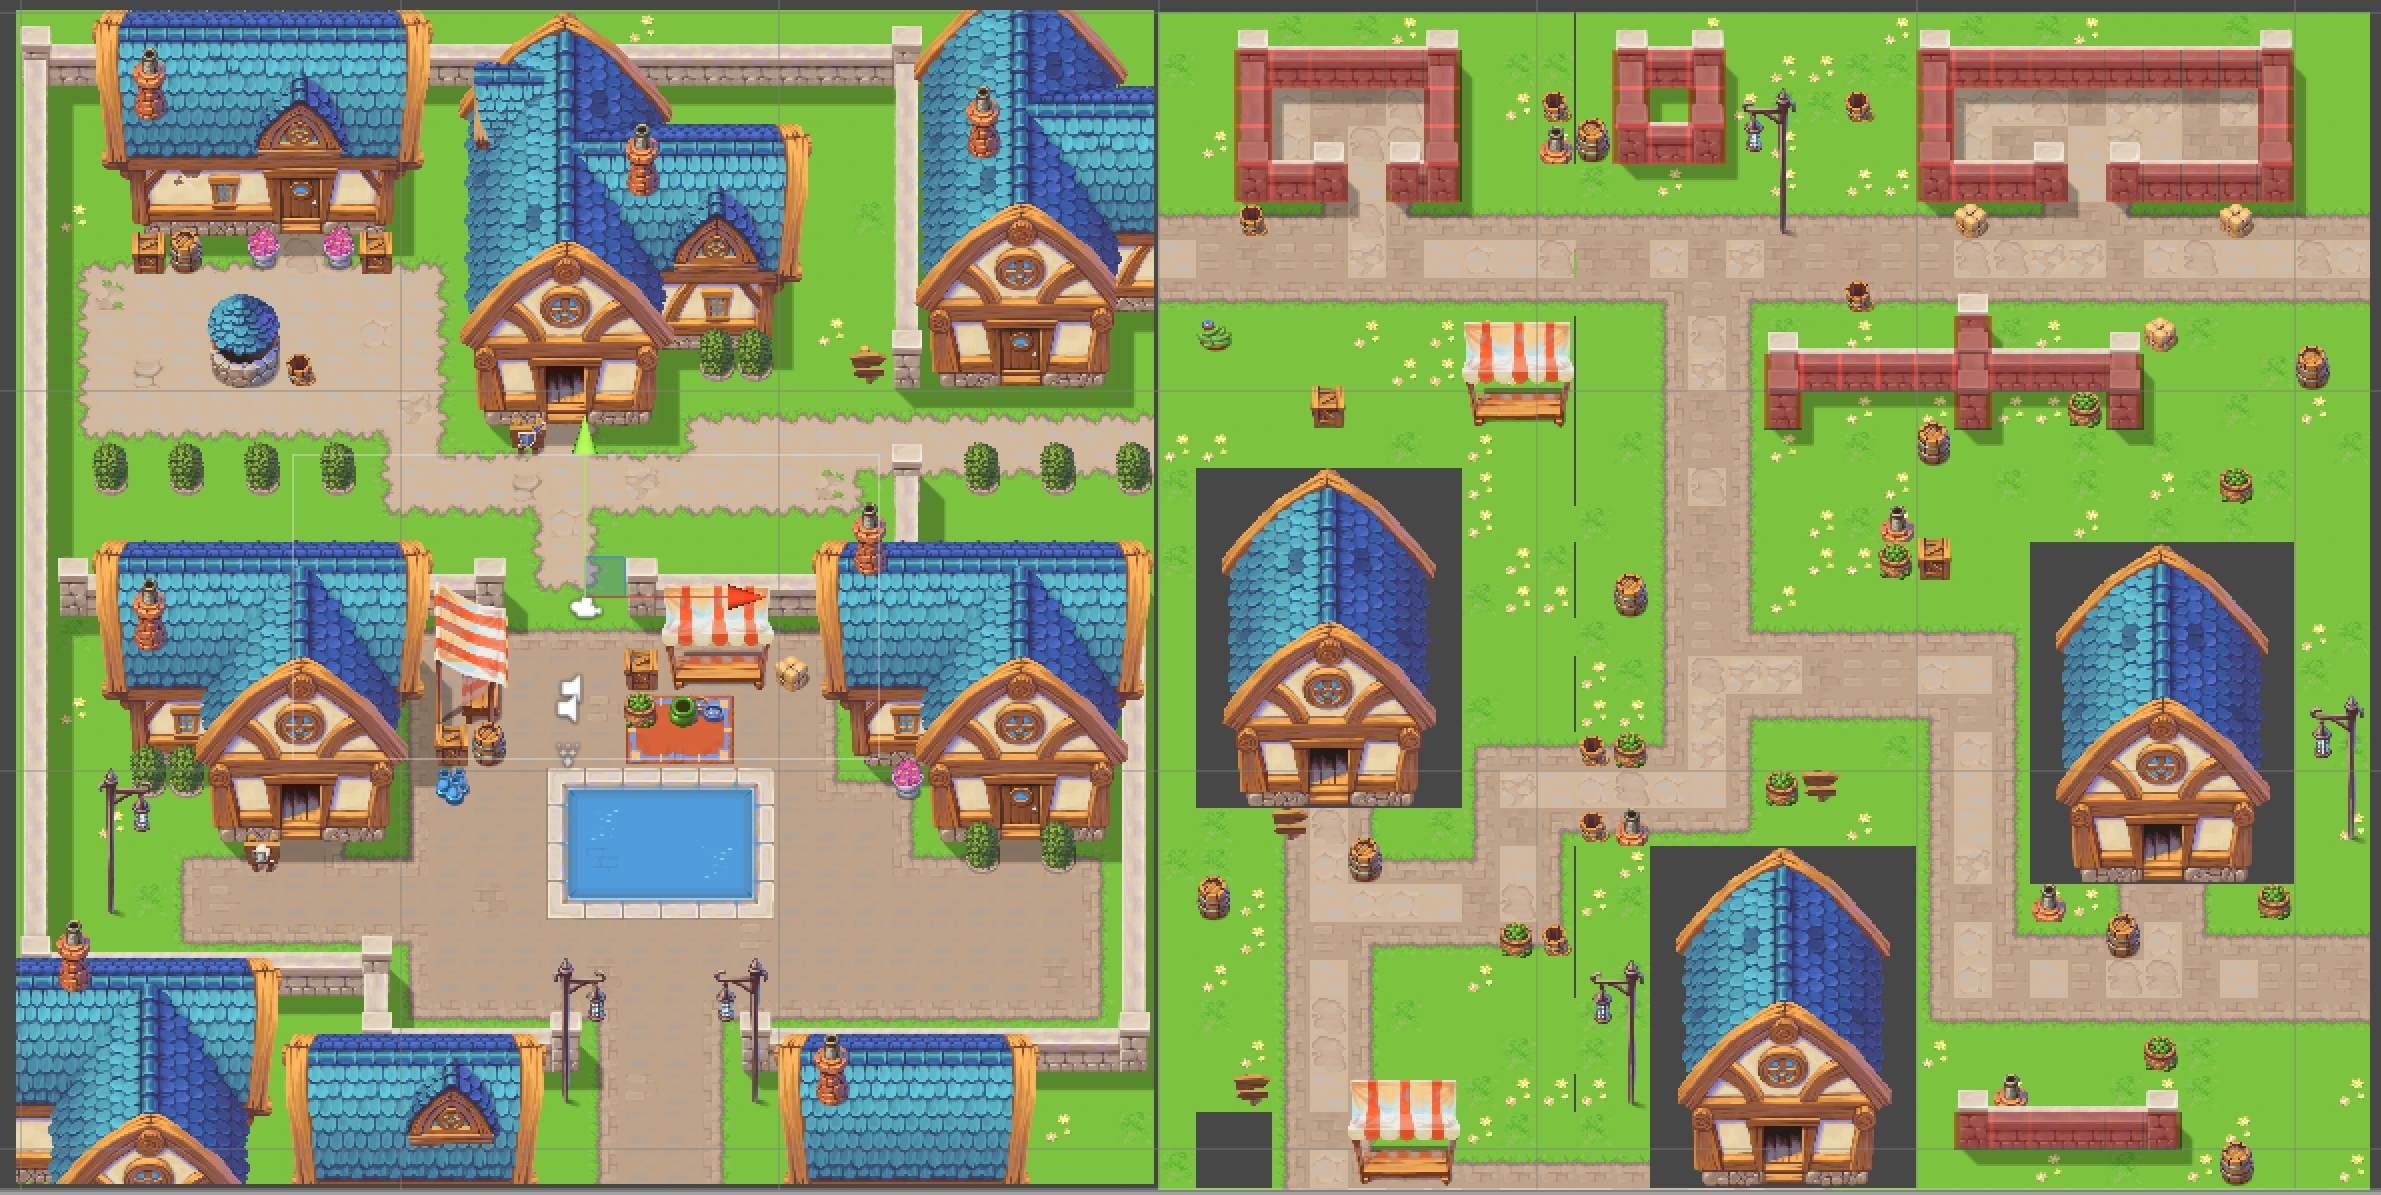 About resolution, pixel art and size - How do I? - GDevelop Forum